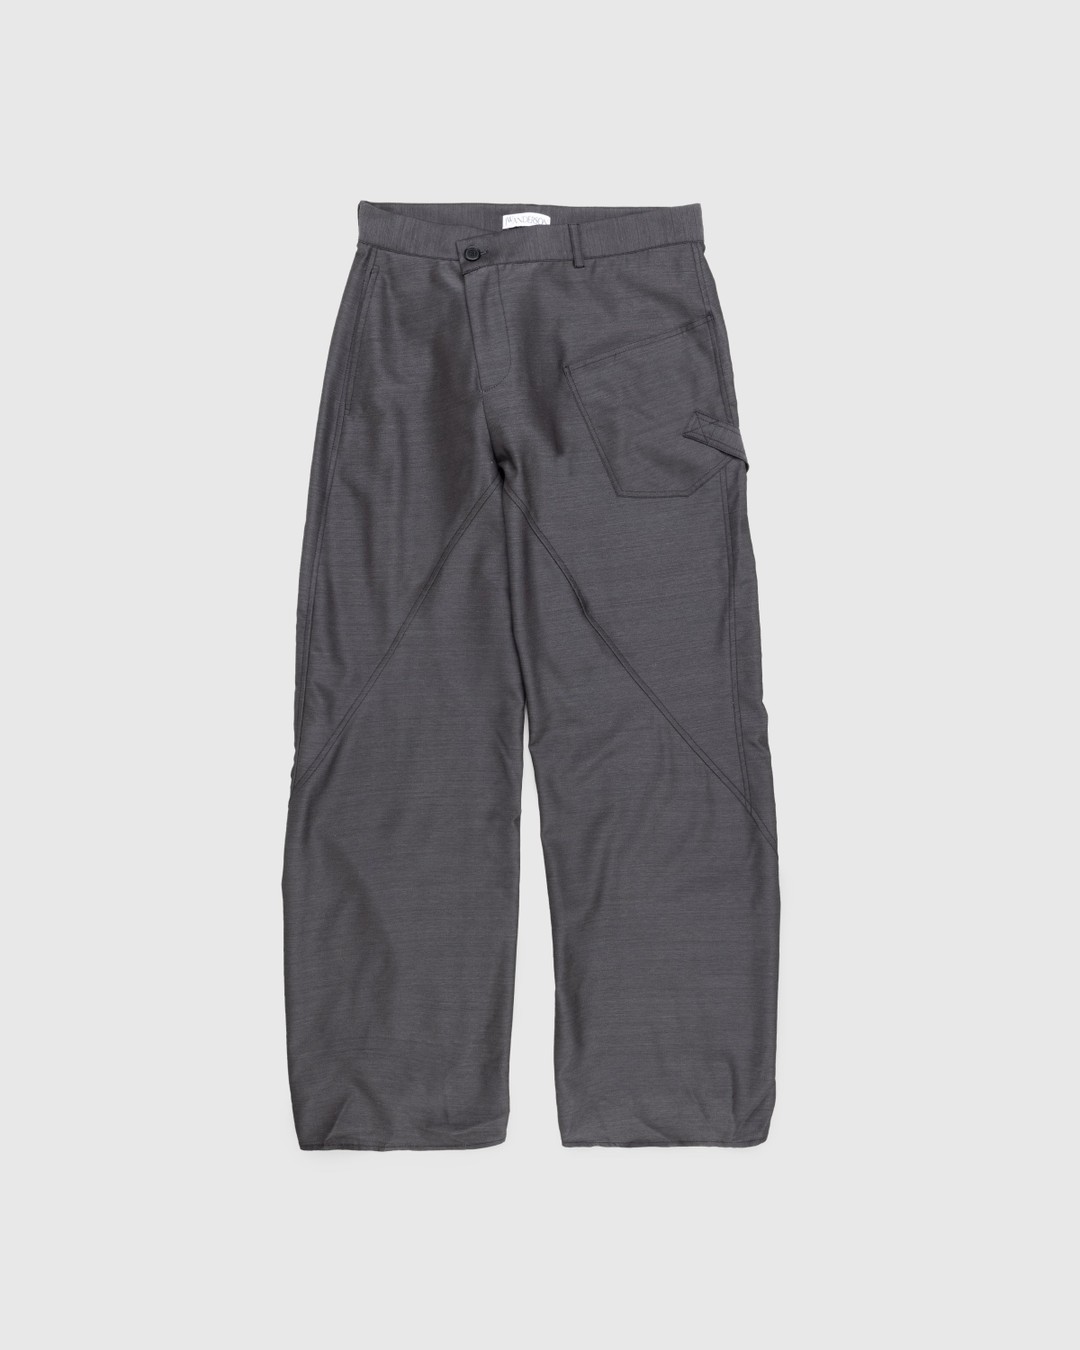 J.W. Anderson – Twisted Workwear Trousers Grey - Pants - Grey - Image 1